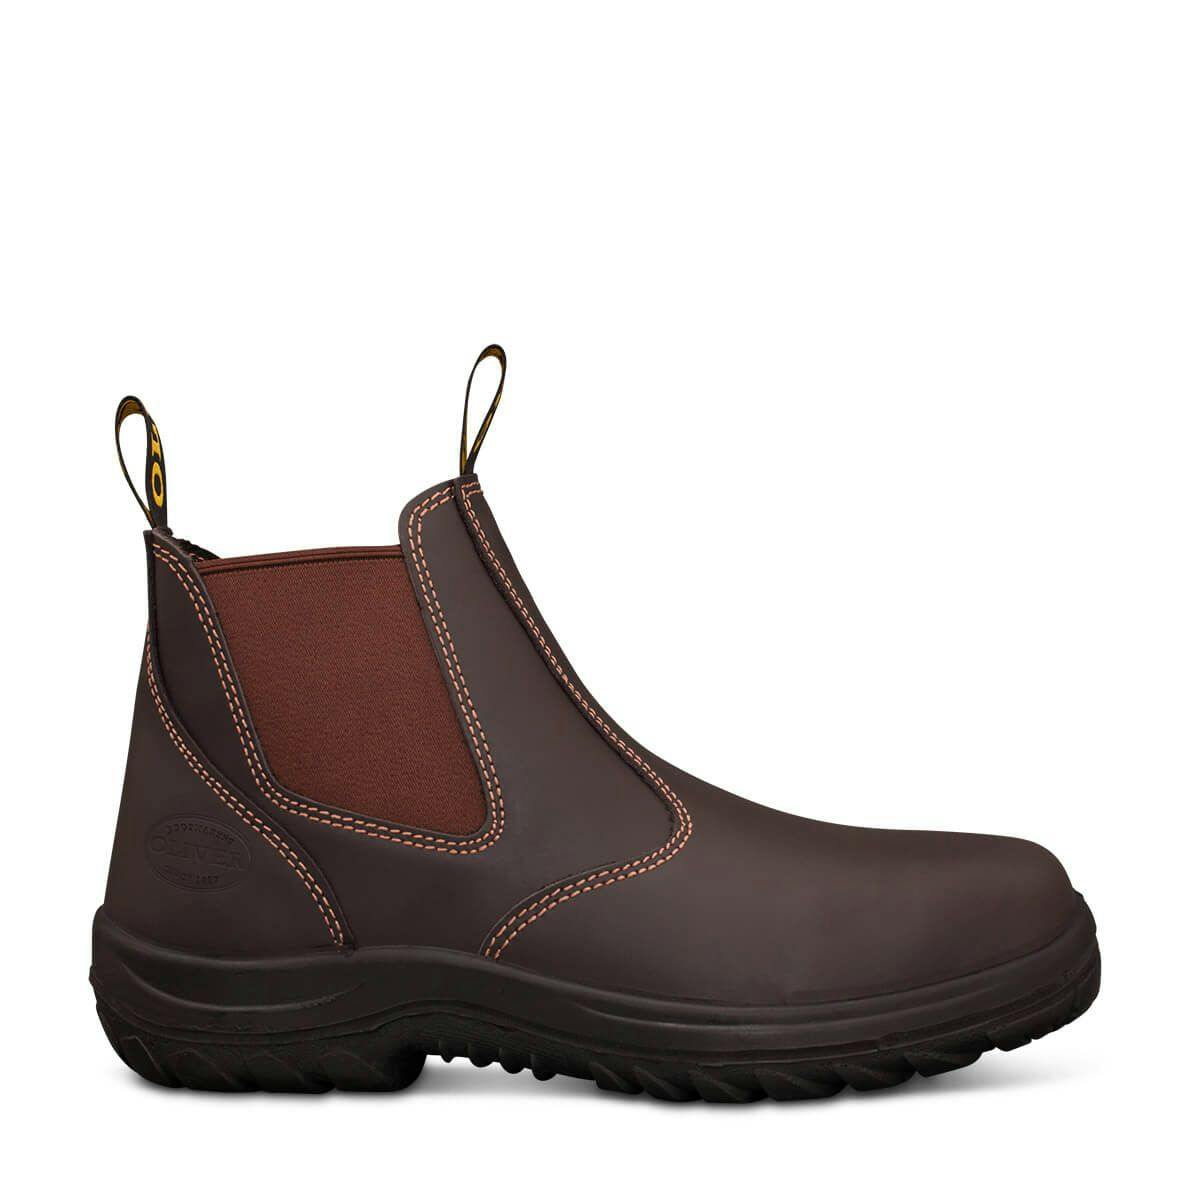 Oliver Elastic Sided Boots, Water Resistant Full Grain Leather_5